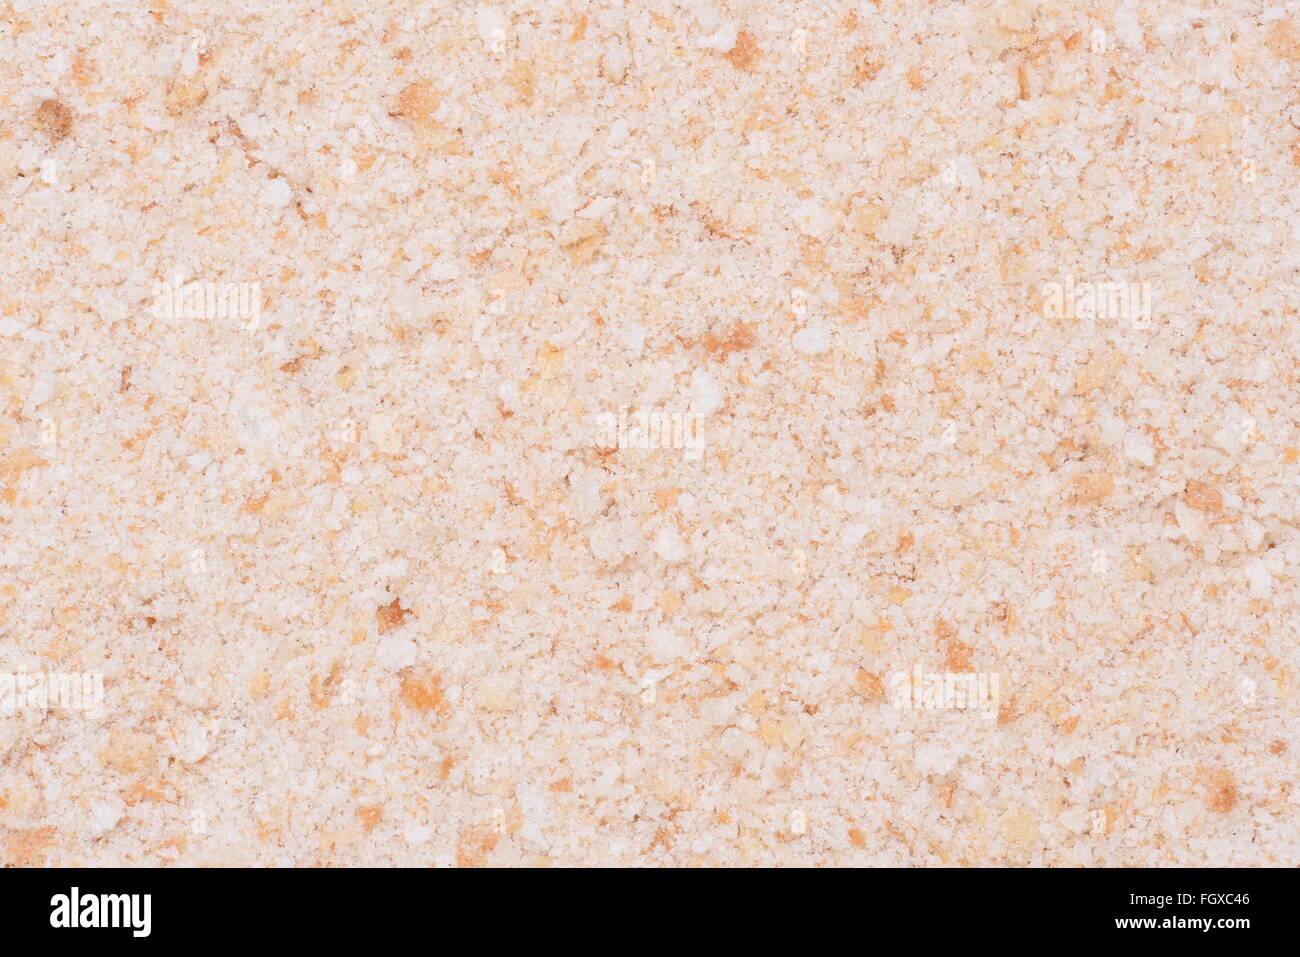 Homemade Bread Crumbs as background Stock Photo